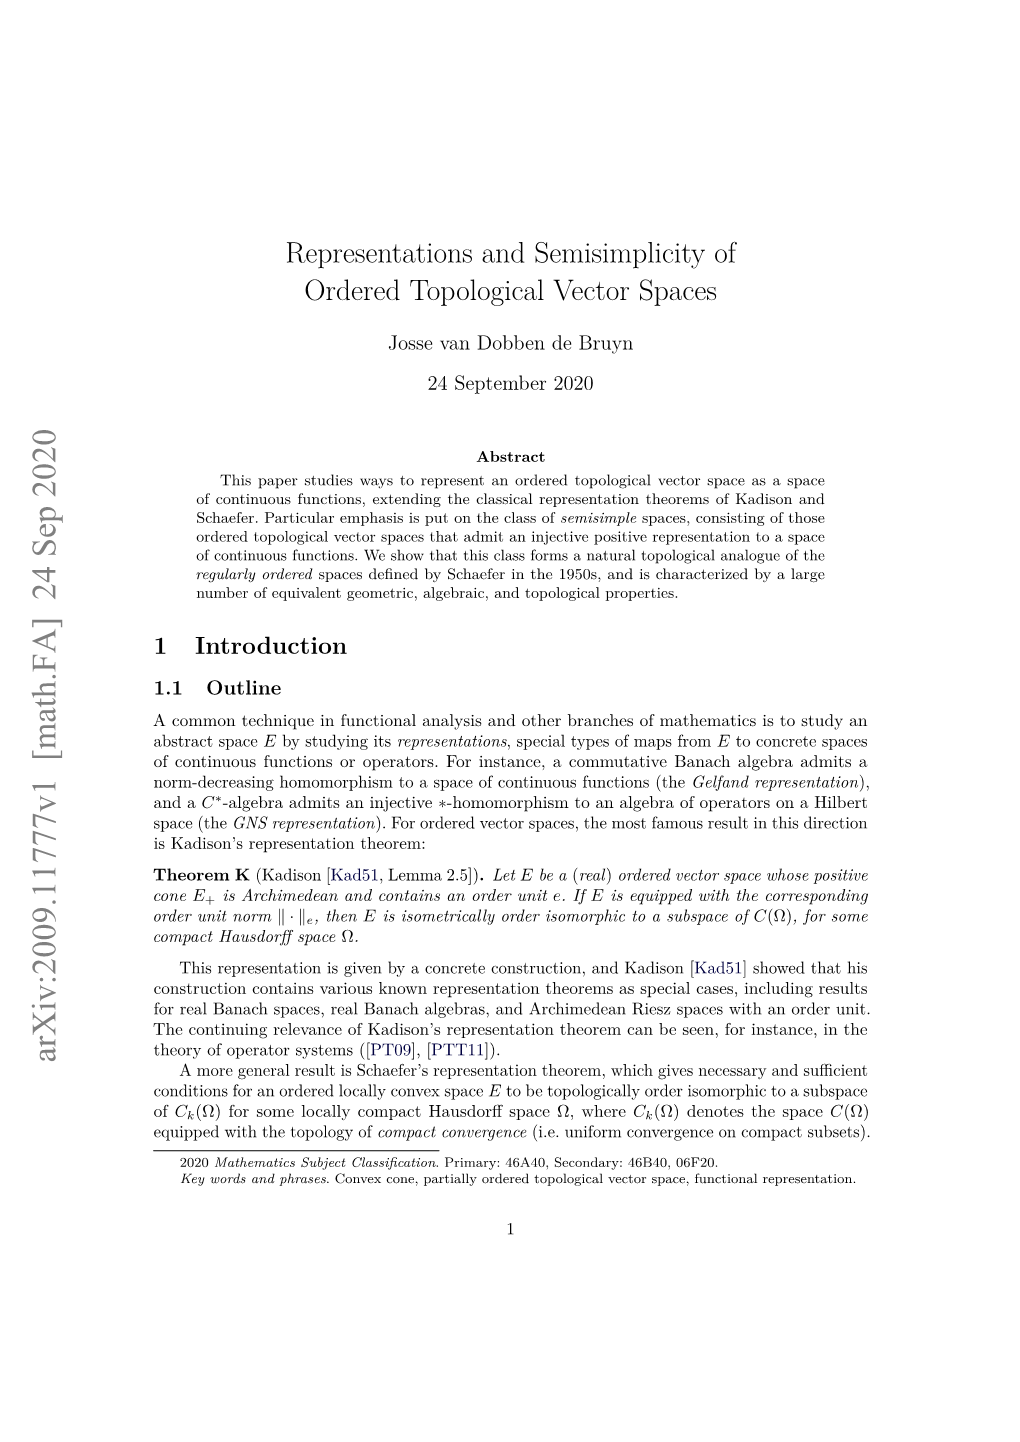 Representations and Semisimplicity of Ordered Topological Vector Spaces